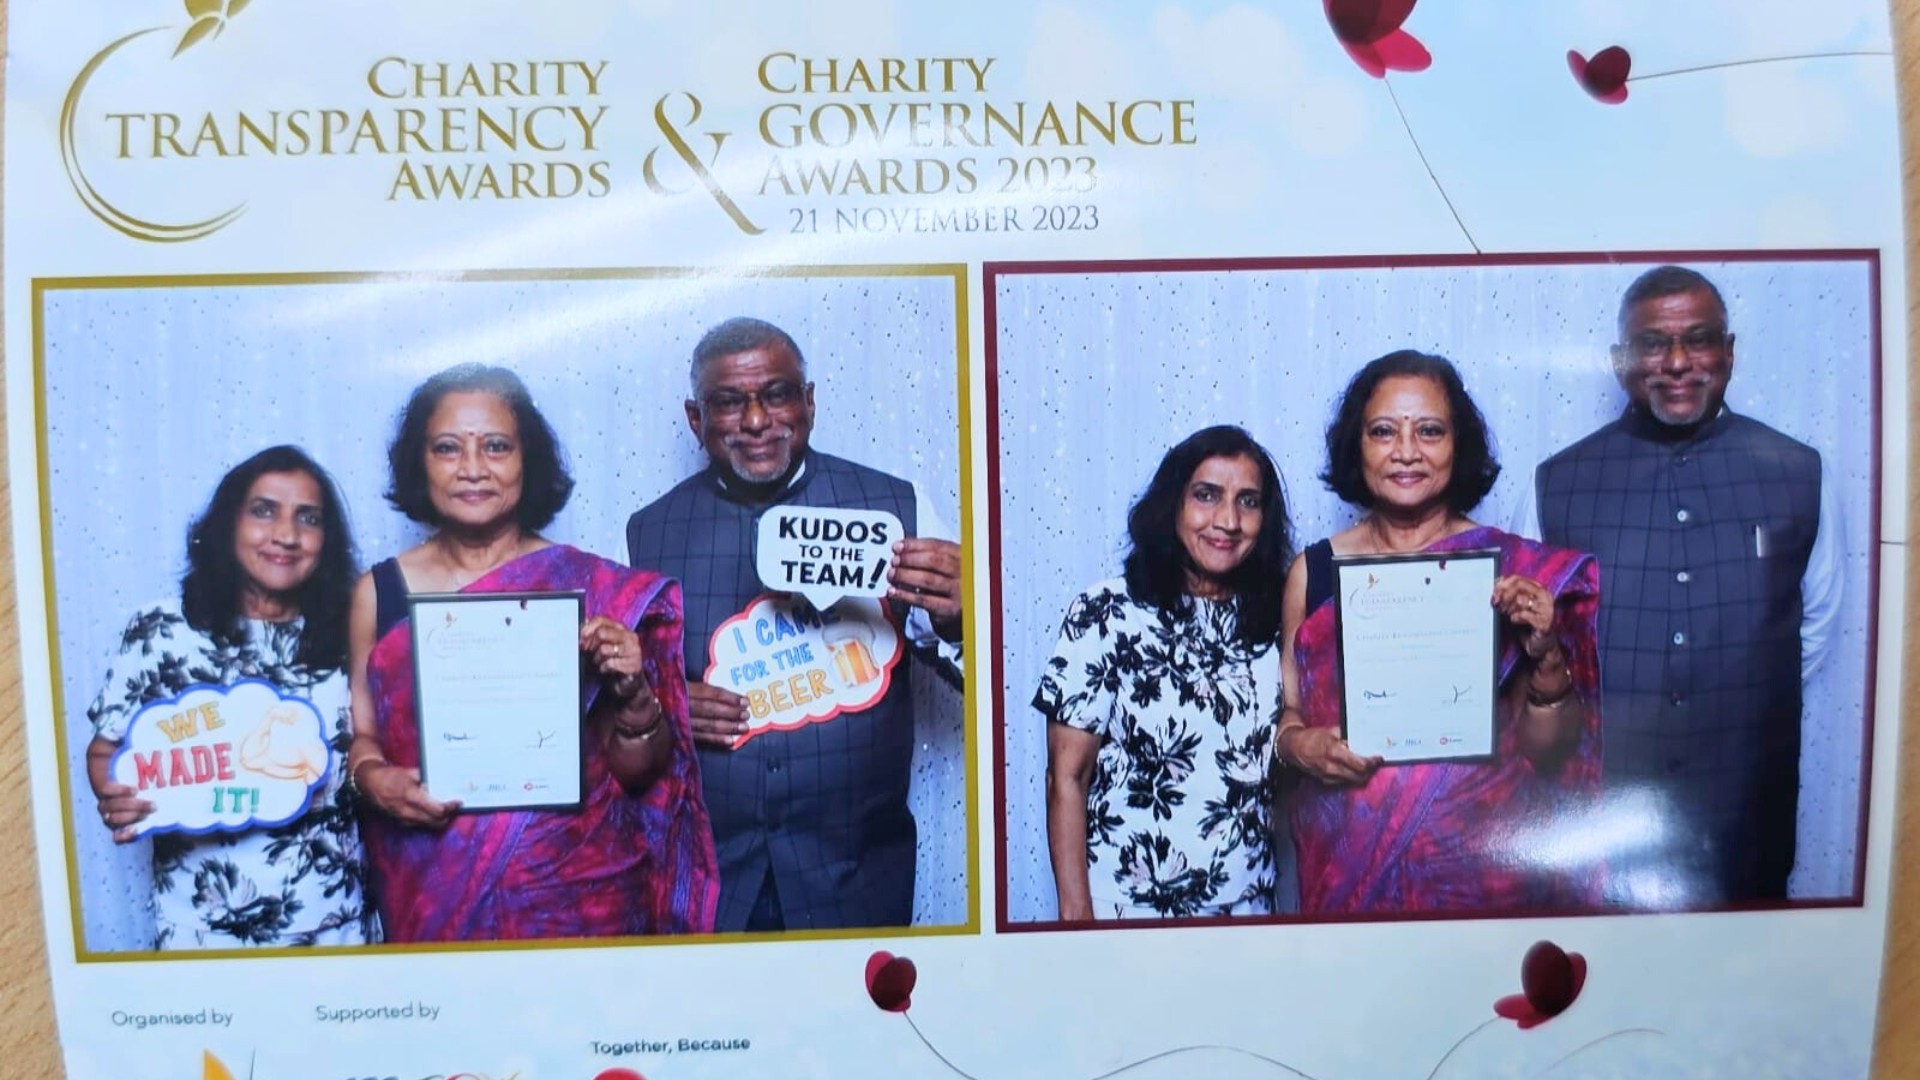 SNM wins Charity Transparency Award 2023